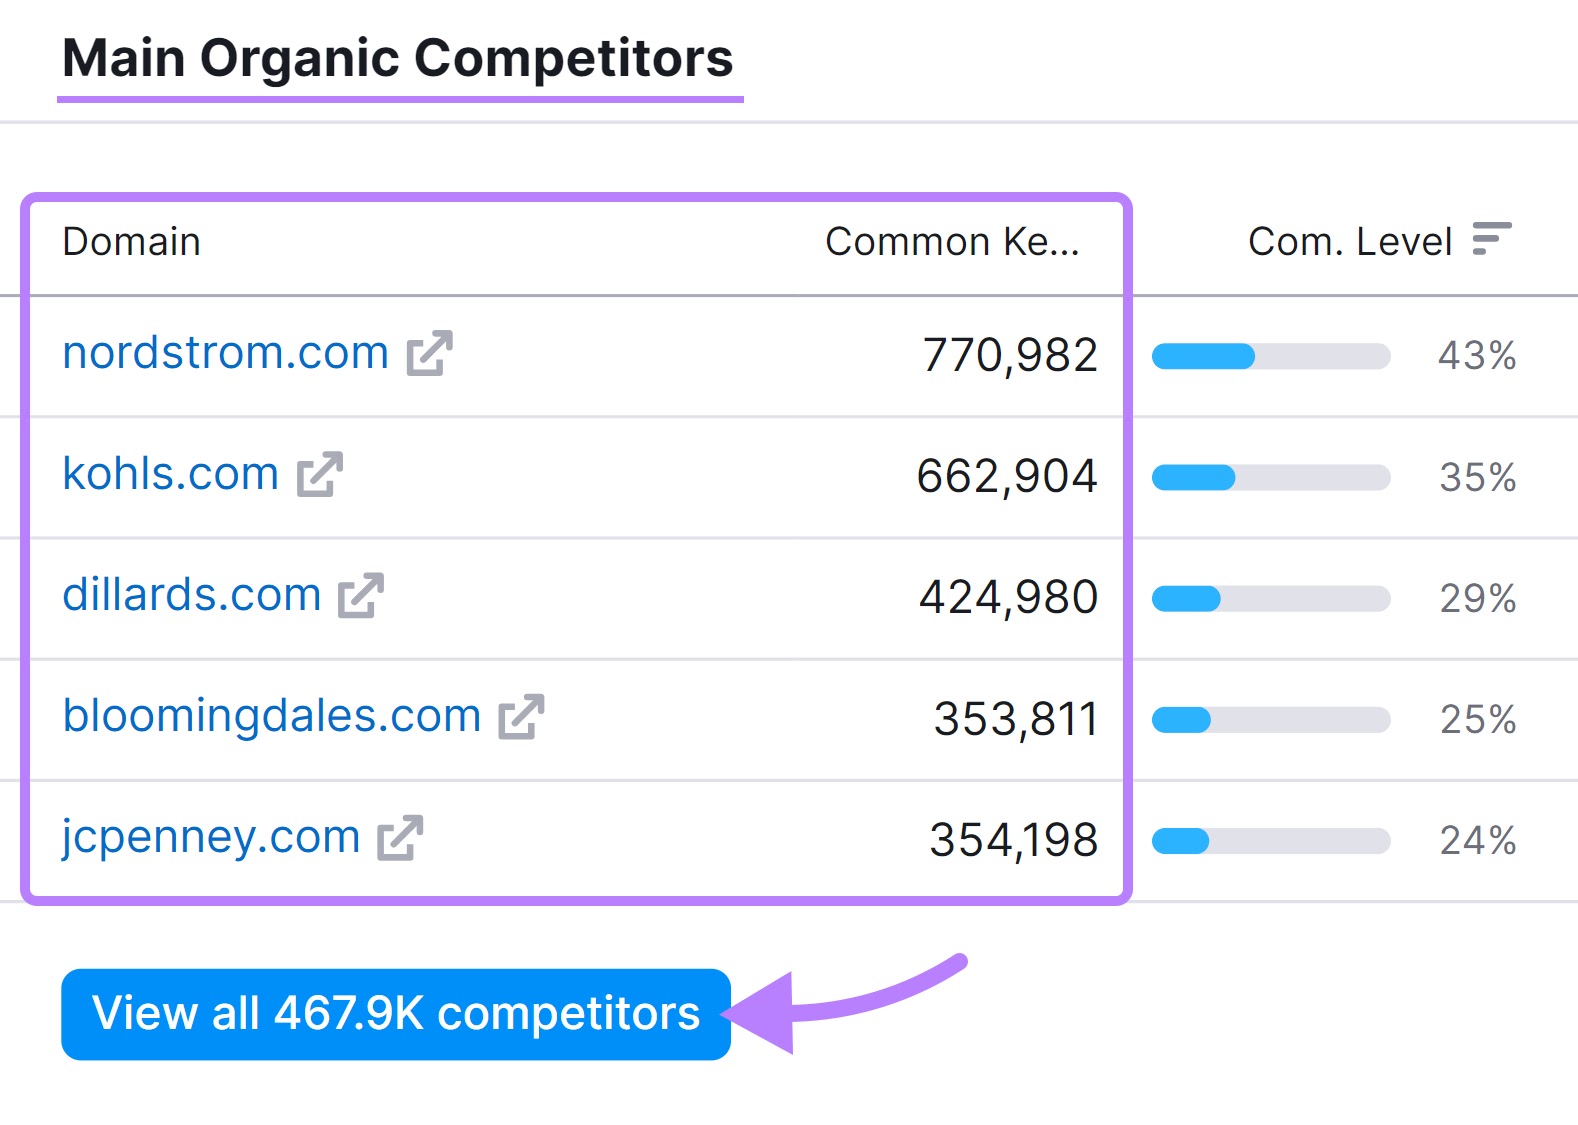 "Main Organic Competitors” section of the report